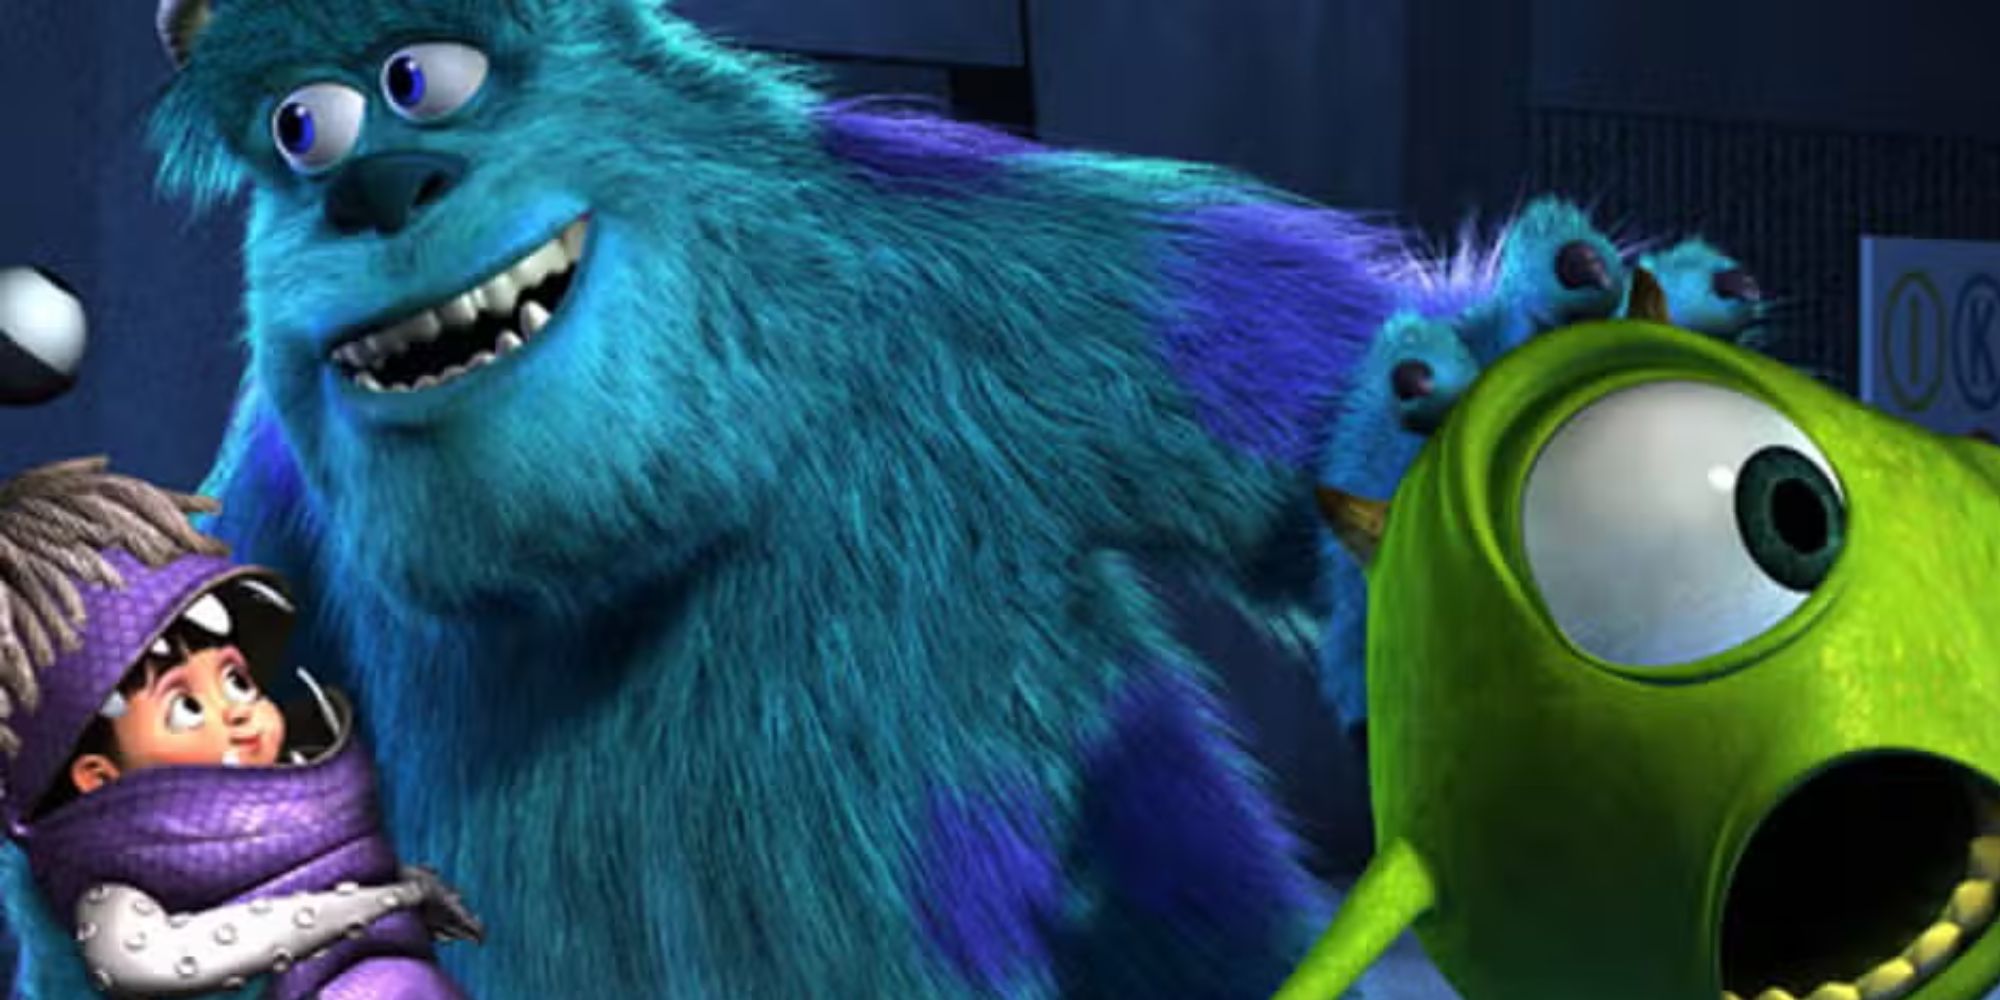 Sulley smiling as he carries Boo and a scared-looking Mike in Monsters, Inc.